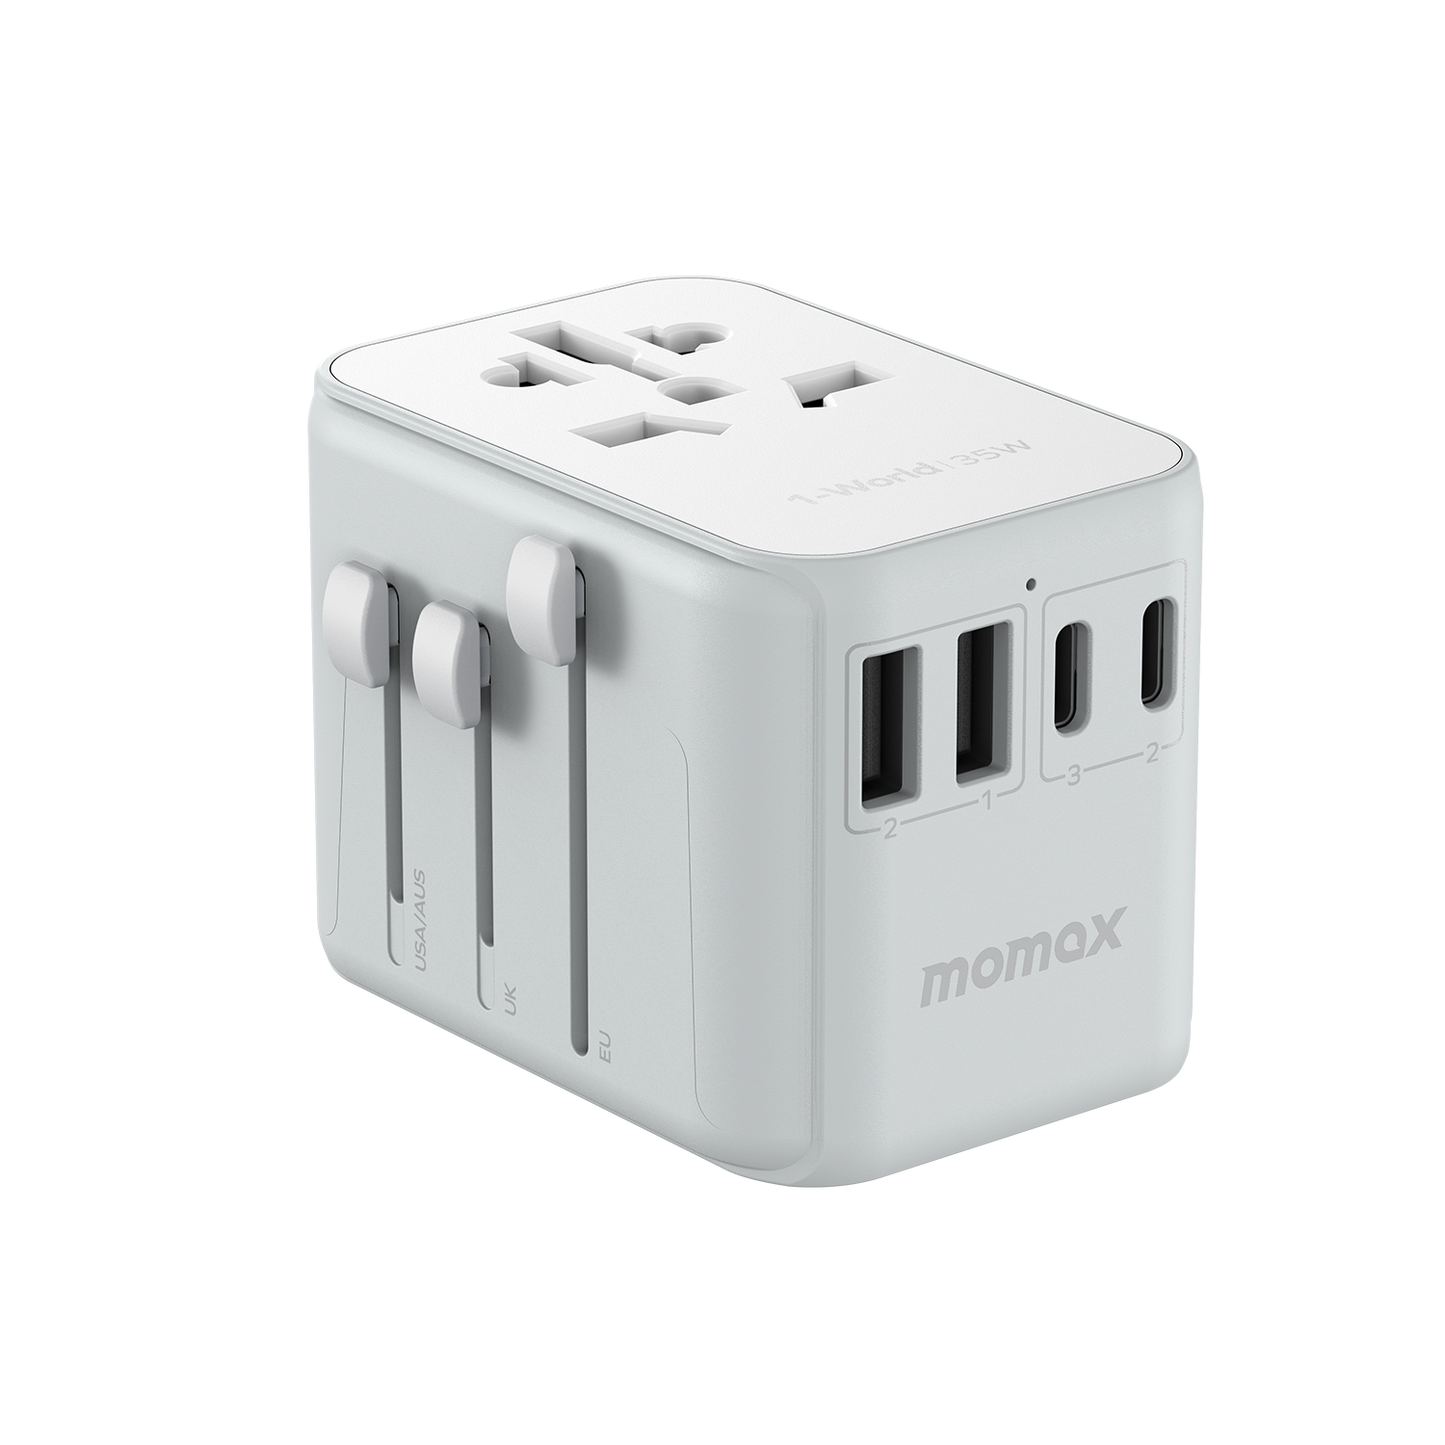 MOMAX 1-World PD 35W 5-Port + AC Charger Travel Adapter